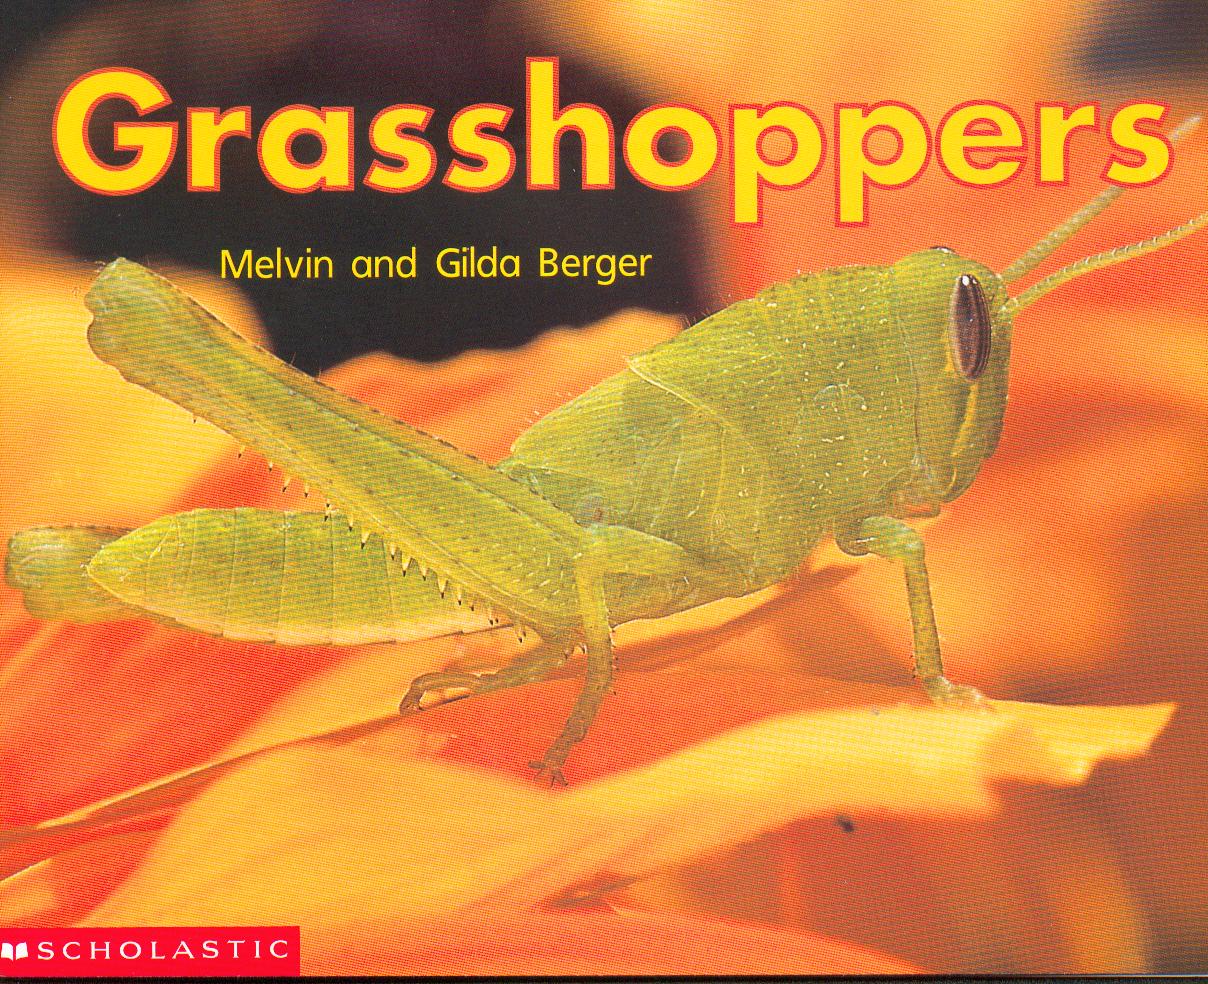 Grasshoppers / Melvin and Gilda Berger.